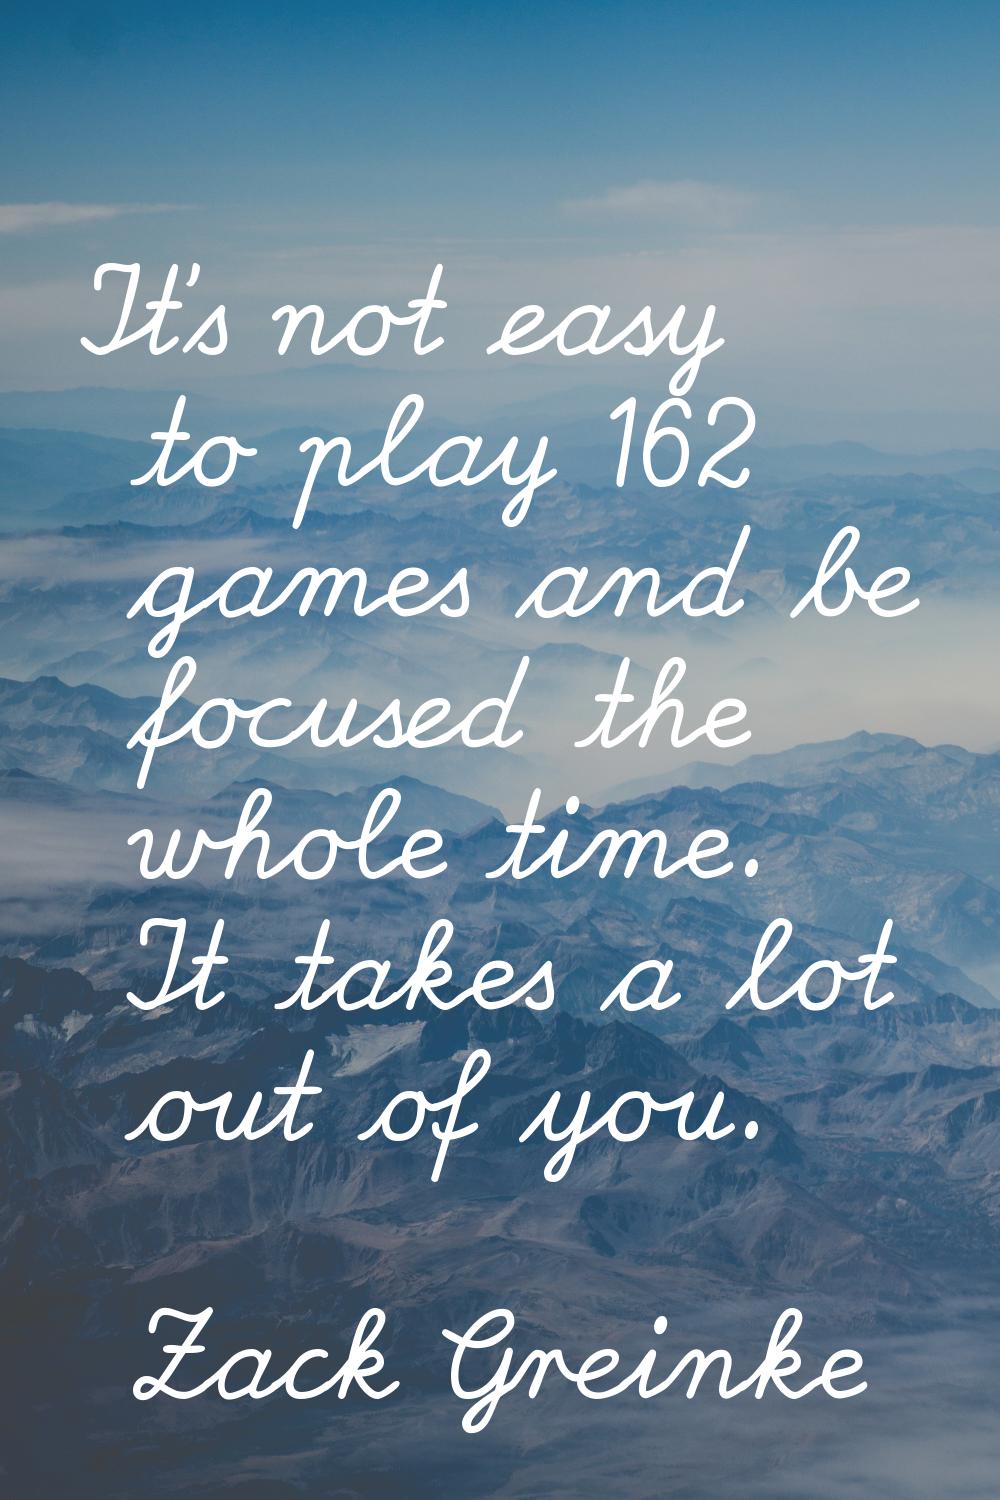 It's not easy to play 162 games and be focused the whole time. It takes a lot out of you.